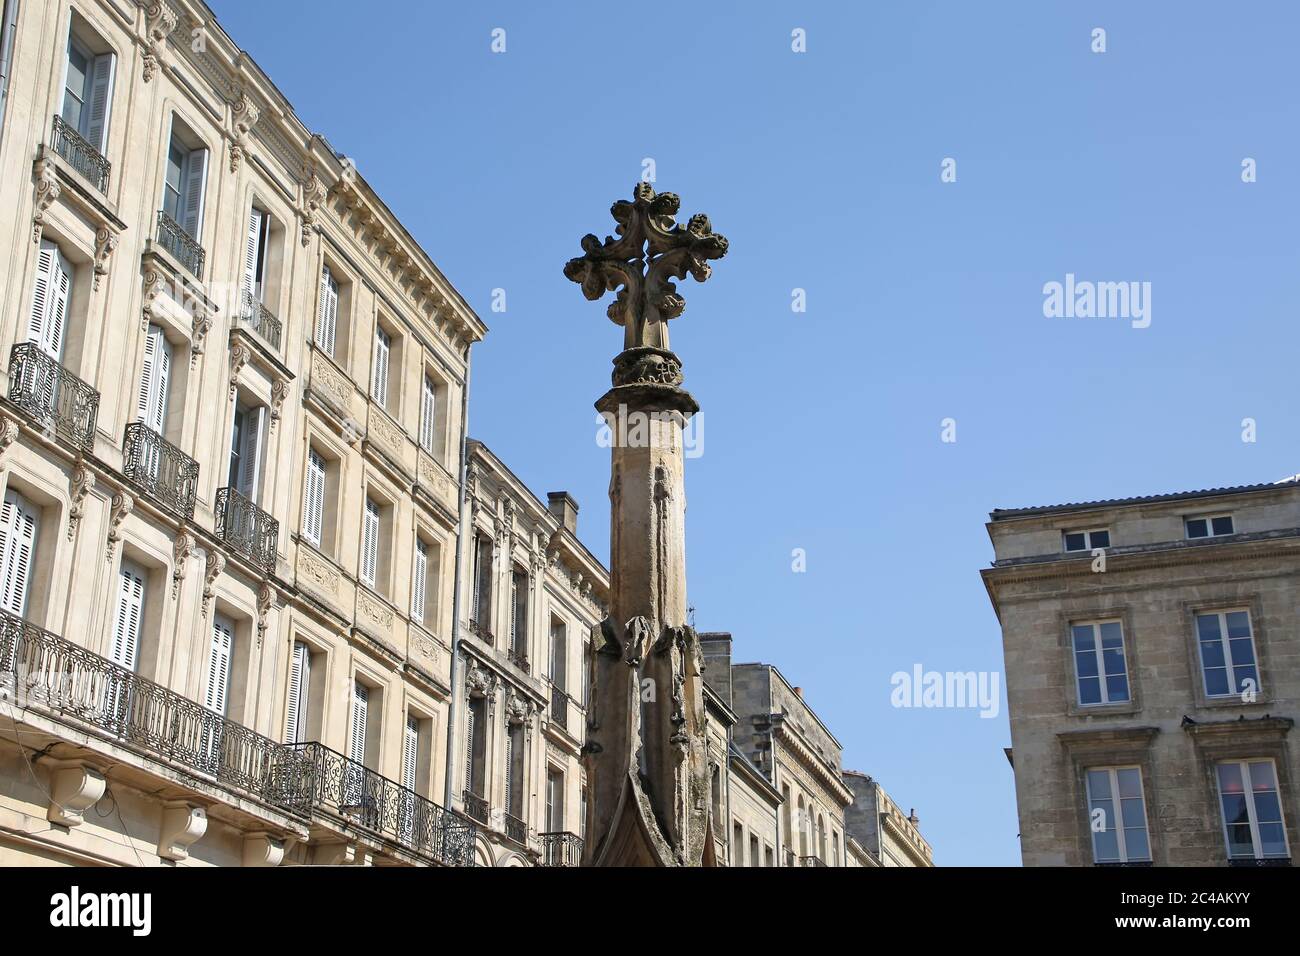 Ancient Cross monument on the Place Saint-Projet square, in the old town with beautiful architecture surrounding it, Bordeaux, France. Stock Photo